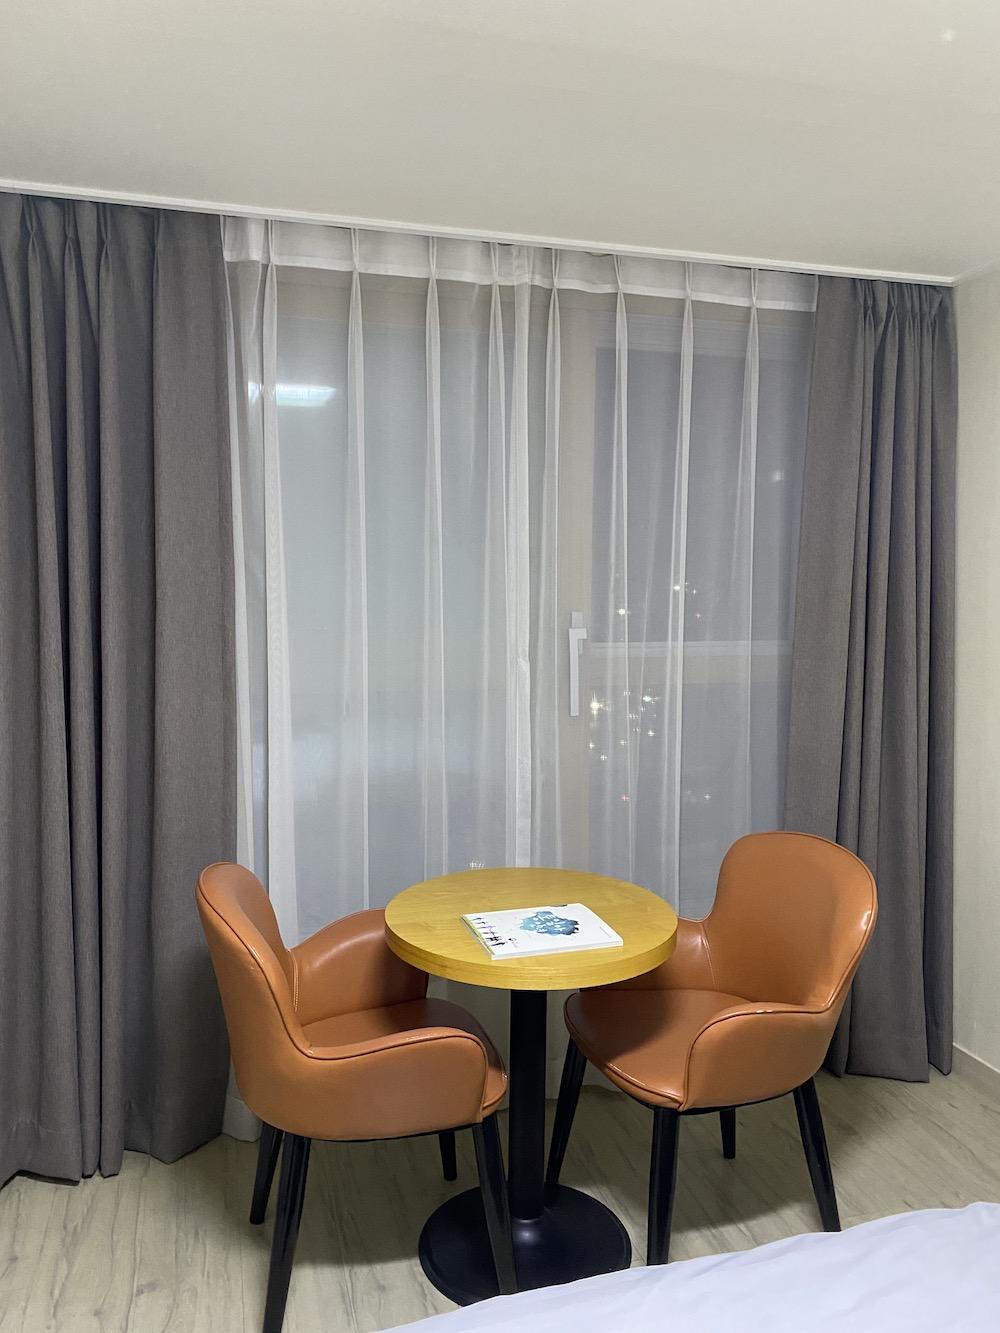 The hotel room for quarantining foreign travelers shows a view of the city's night traffic behind the window curtain. I entered the hotel room close to 10 p.m., which was approximately six hours after my plane landed.